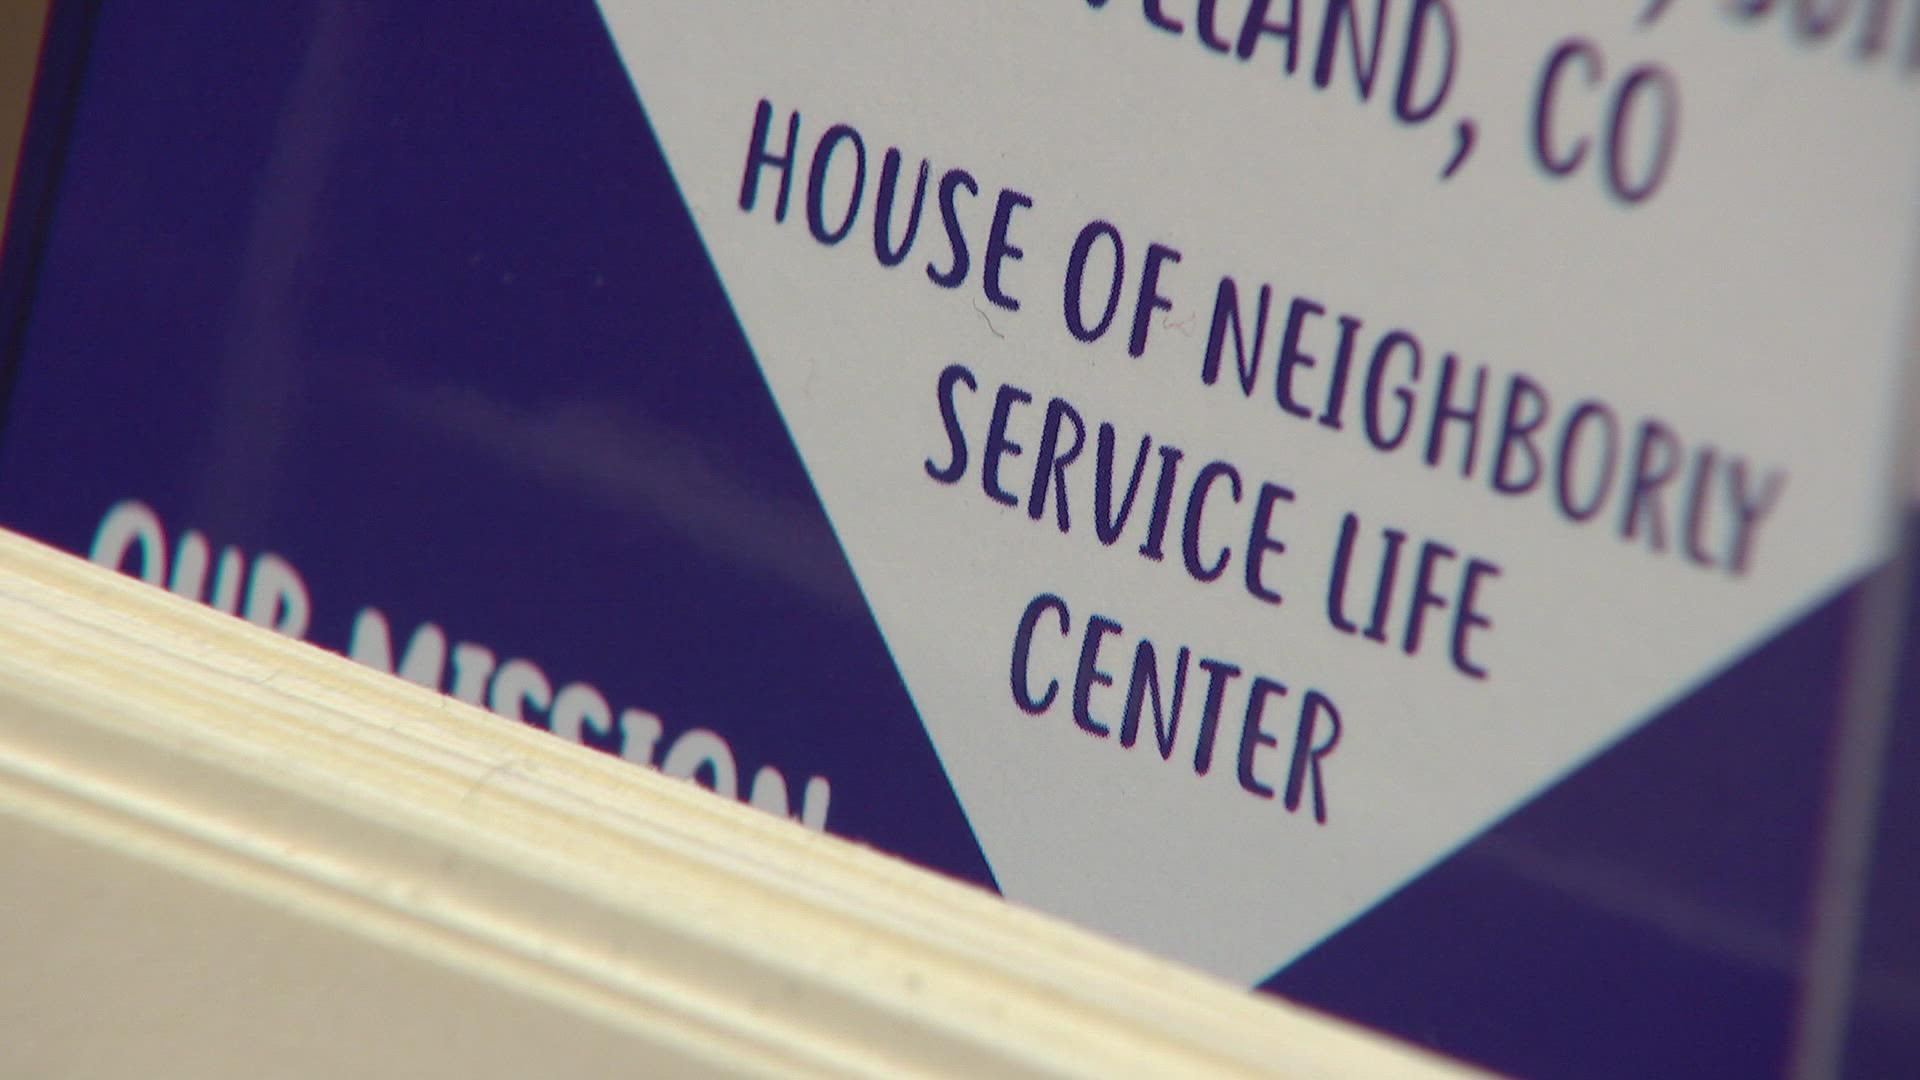 The House of Neighborly Service says demand for their services has doubled. The Loveland nonprofit provided basic needs for people -- including food and clothing.